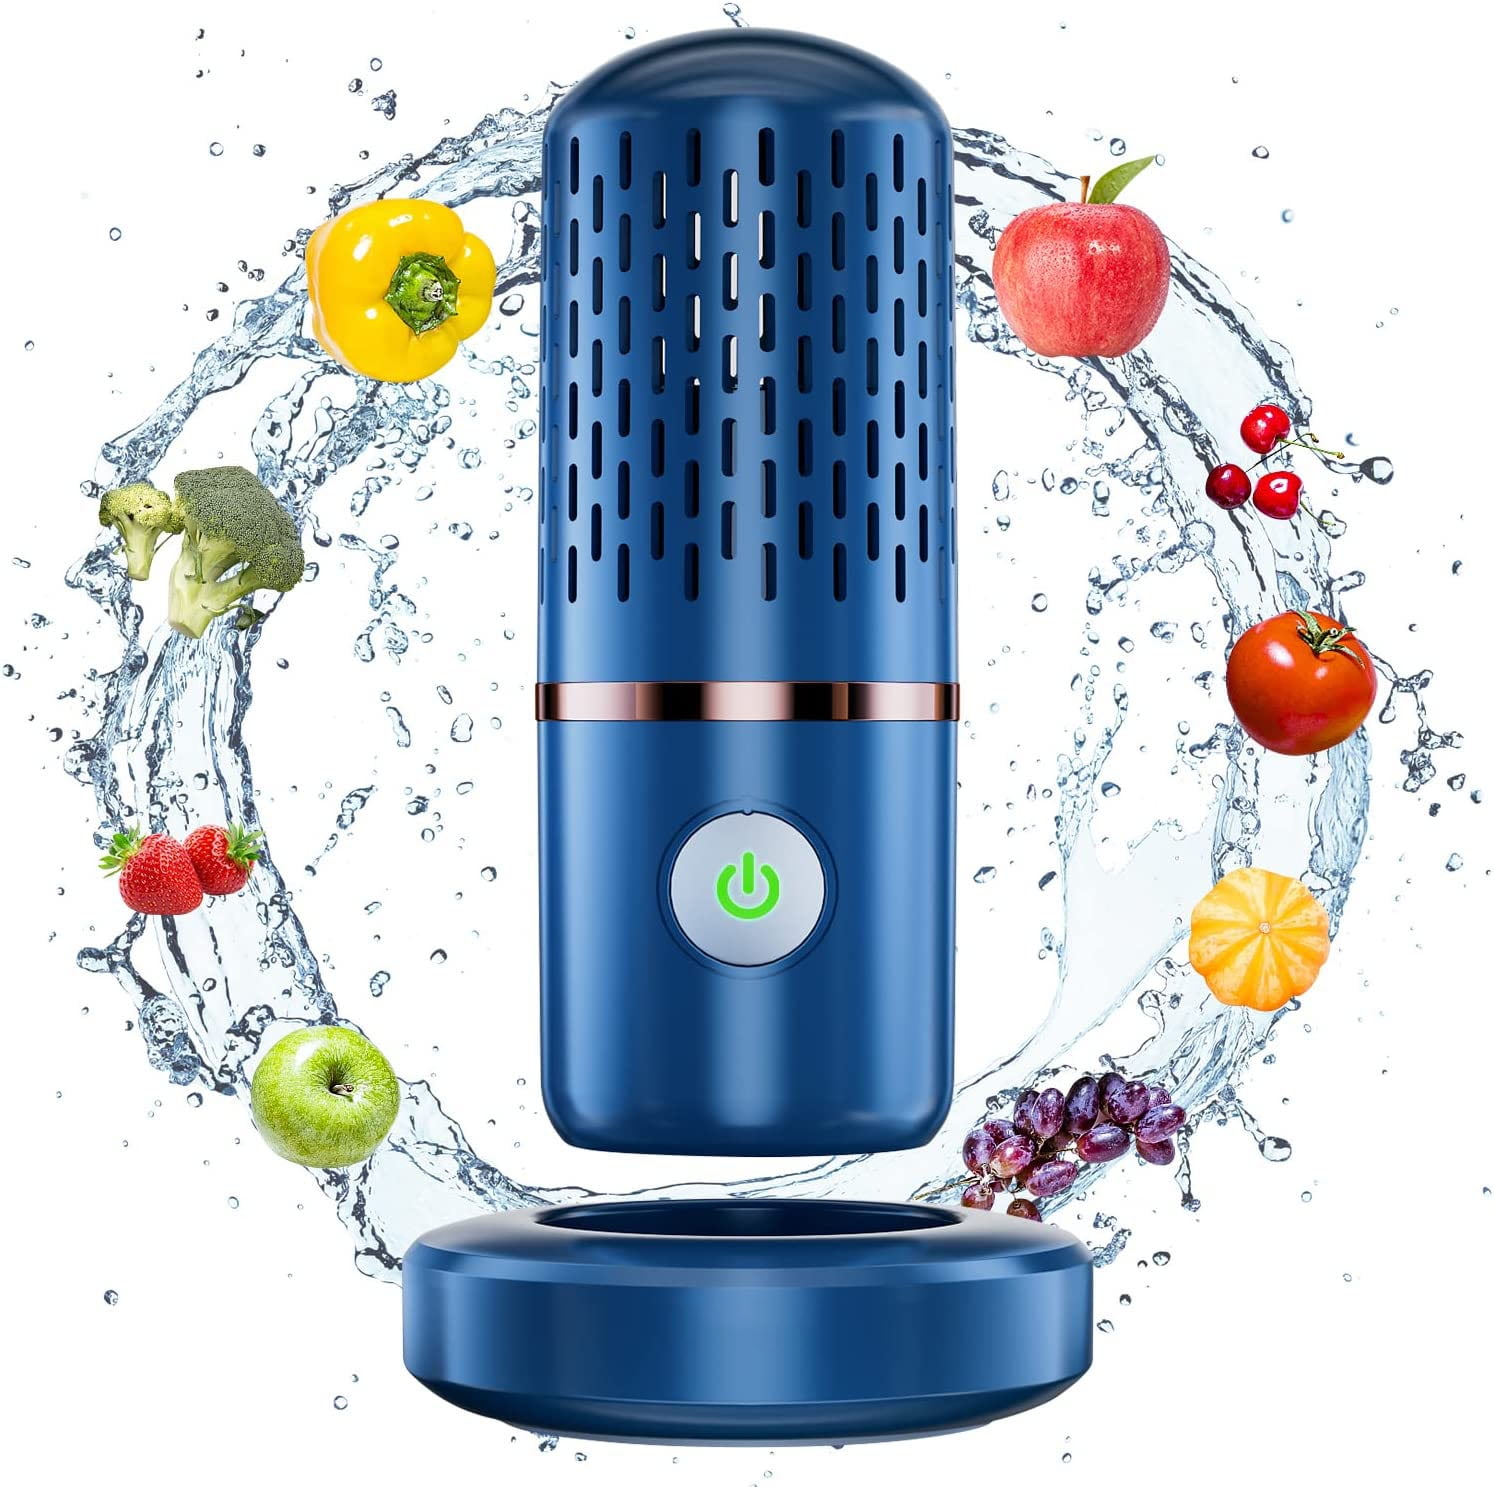 Vegetable Cleaner Device, Calody Fruit and Vegetable Washing Machine with  USB Rechargeable Base OH-ion Purification Technology for Cleaning Vegetable  Fruit - Blue 